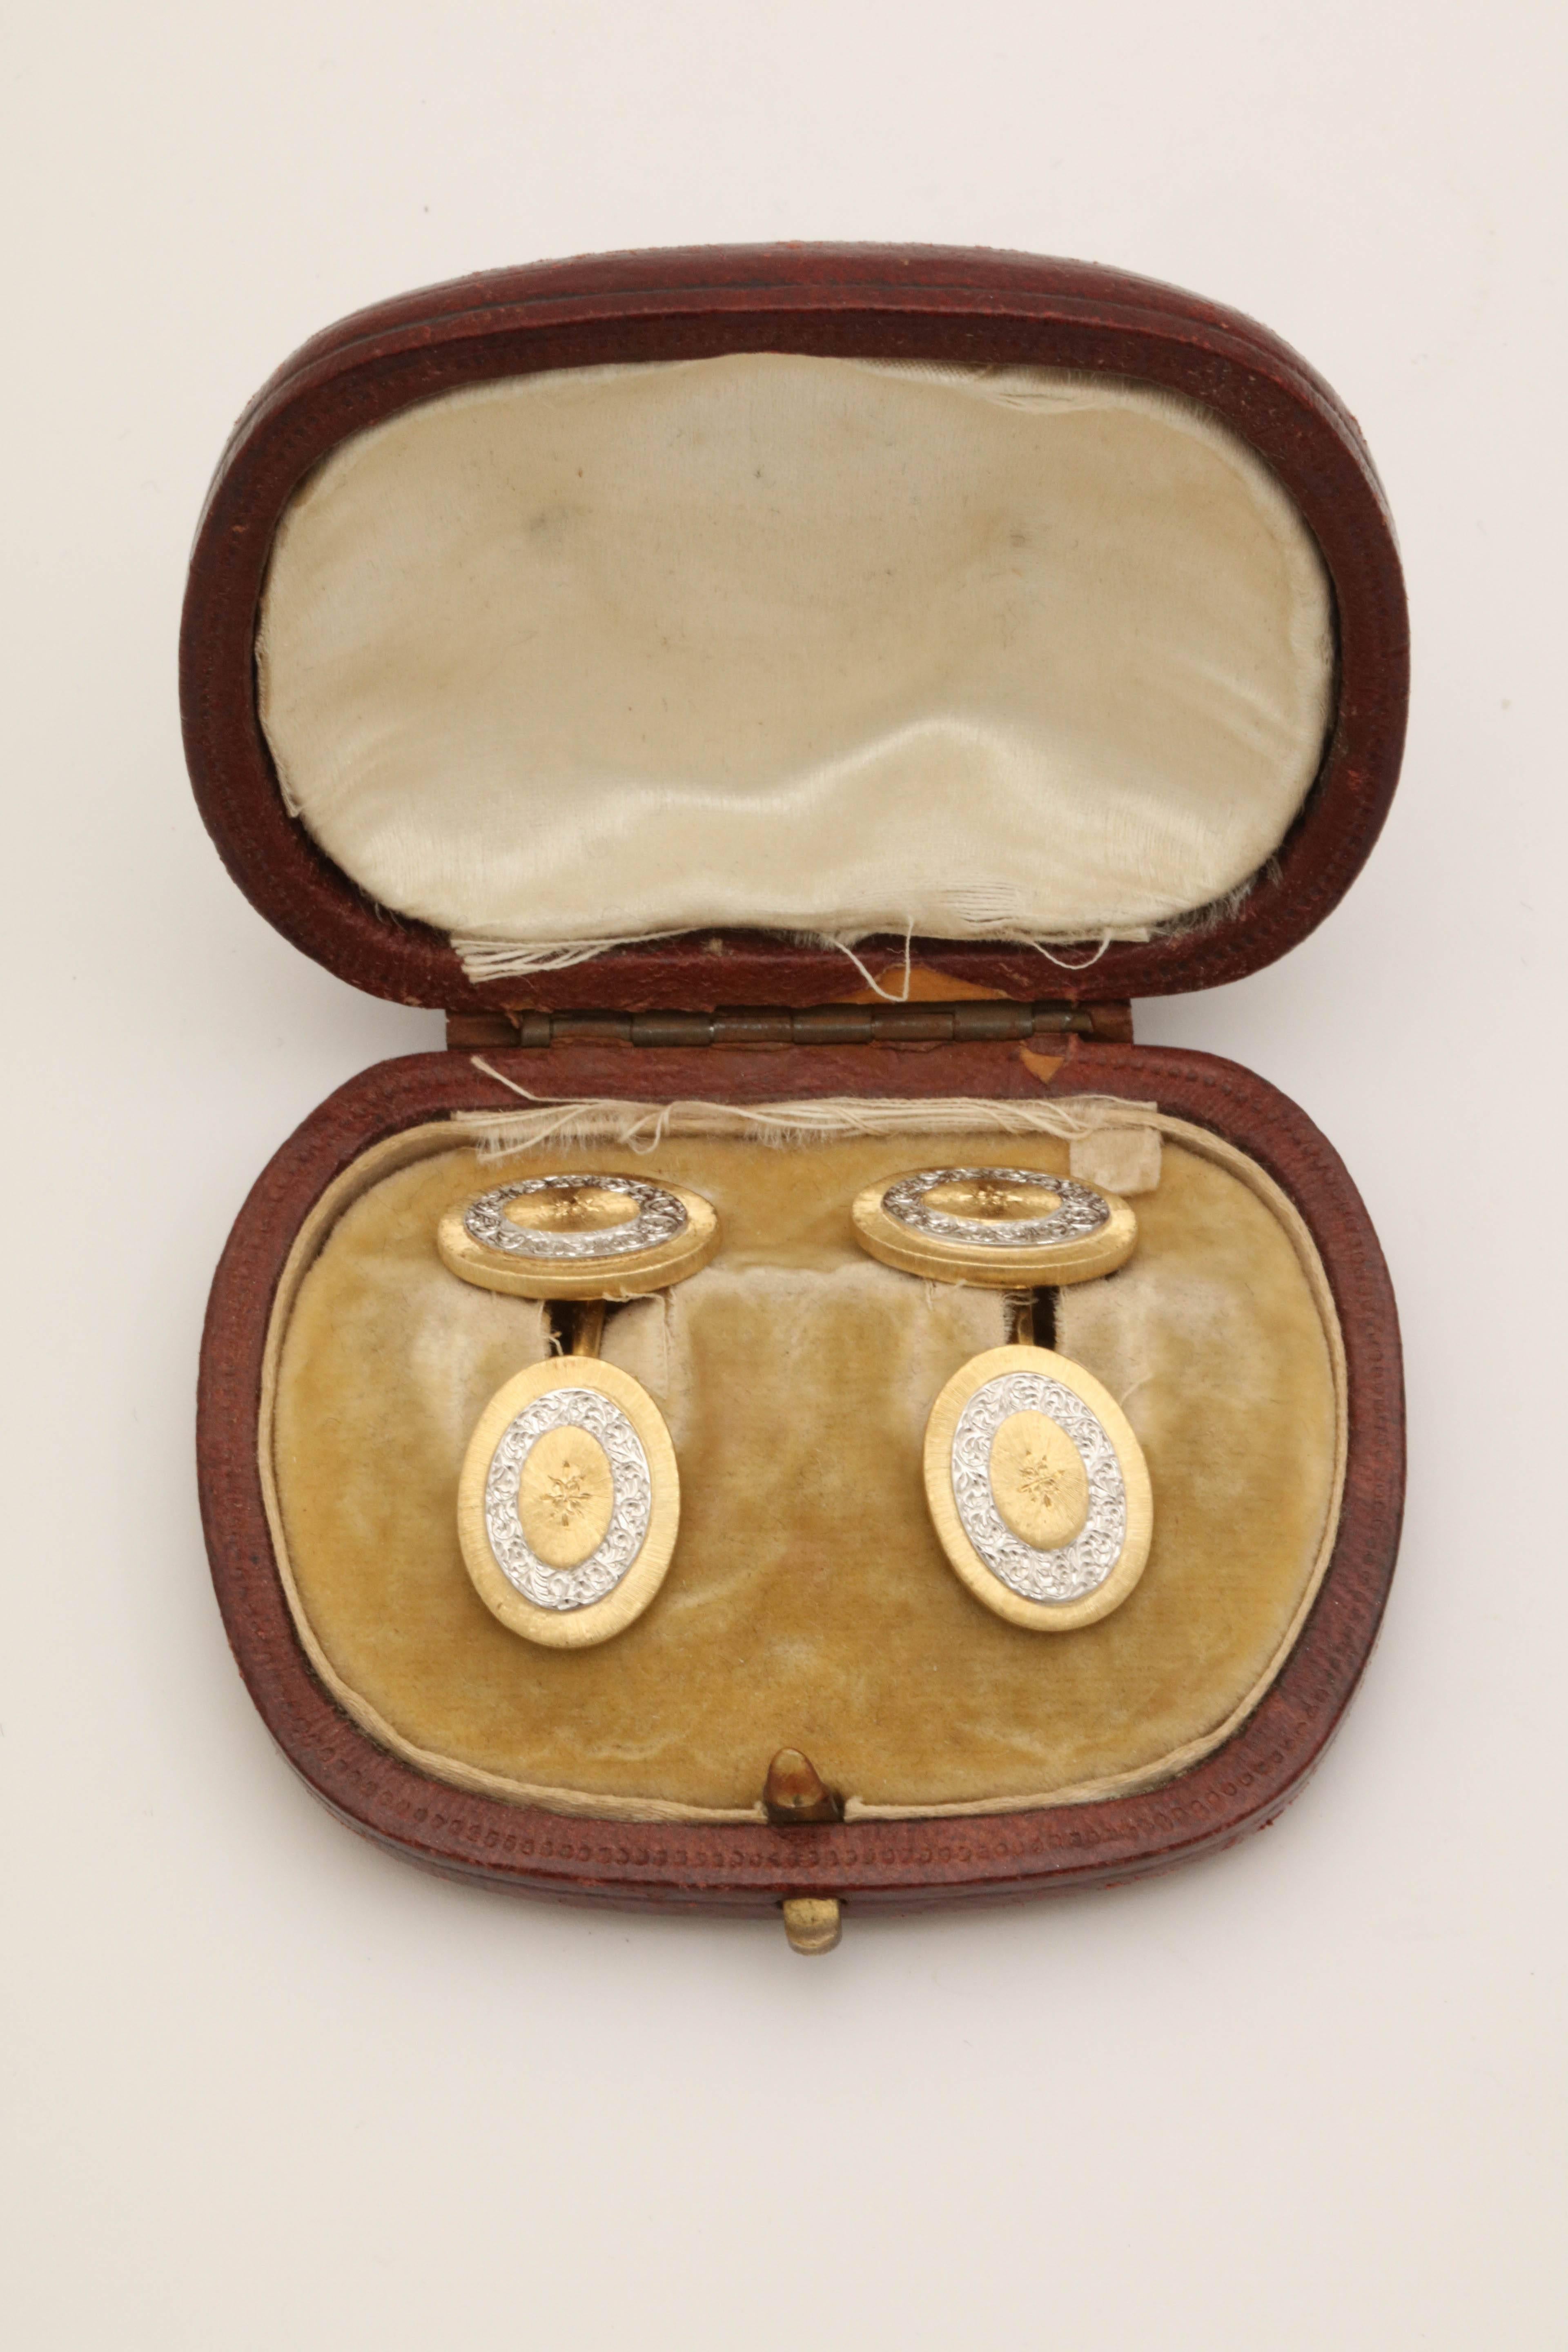 One Pair Of Gentleman's Double Sided Oval Shaped White And Yellow 18kt Gold Cufflinks With a Hand Engraving White Gold Pattern In Center Of Cufflinks And A Yellow Gold Florentine Finish design Pattern Signed Mario Buccellati And Designed In The